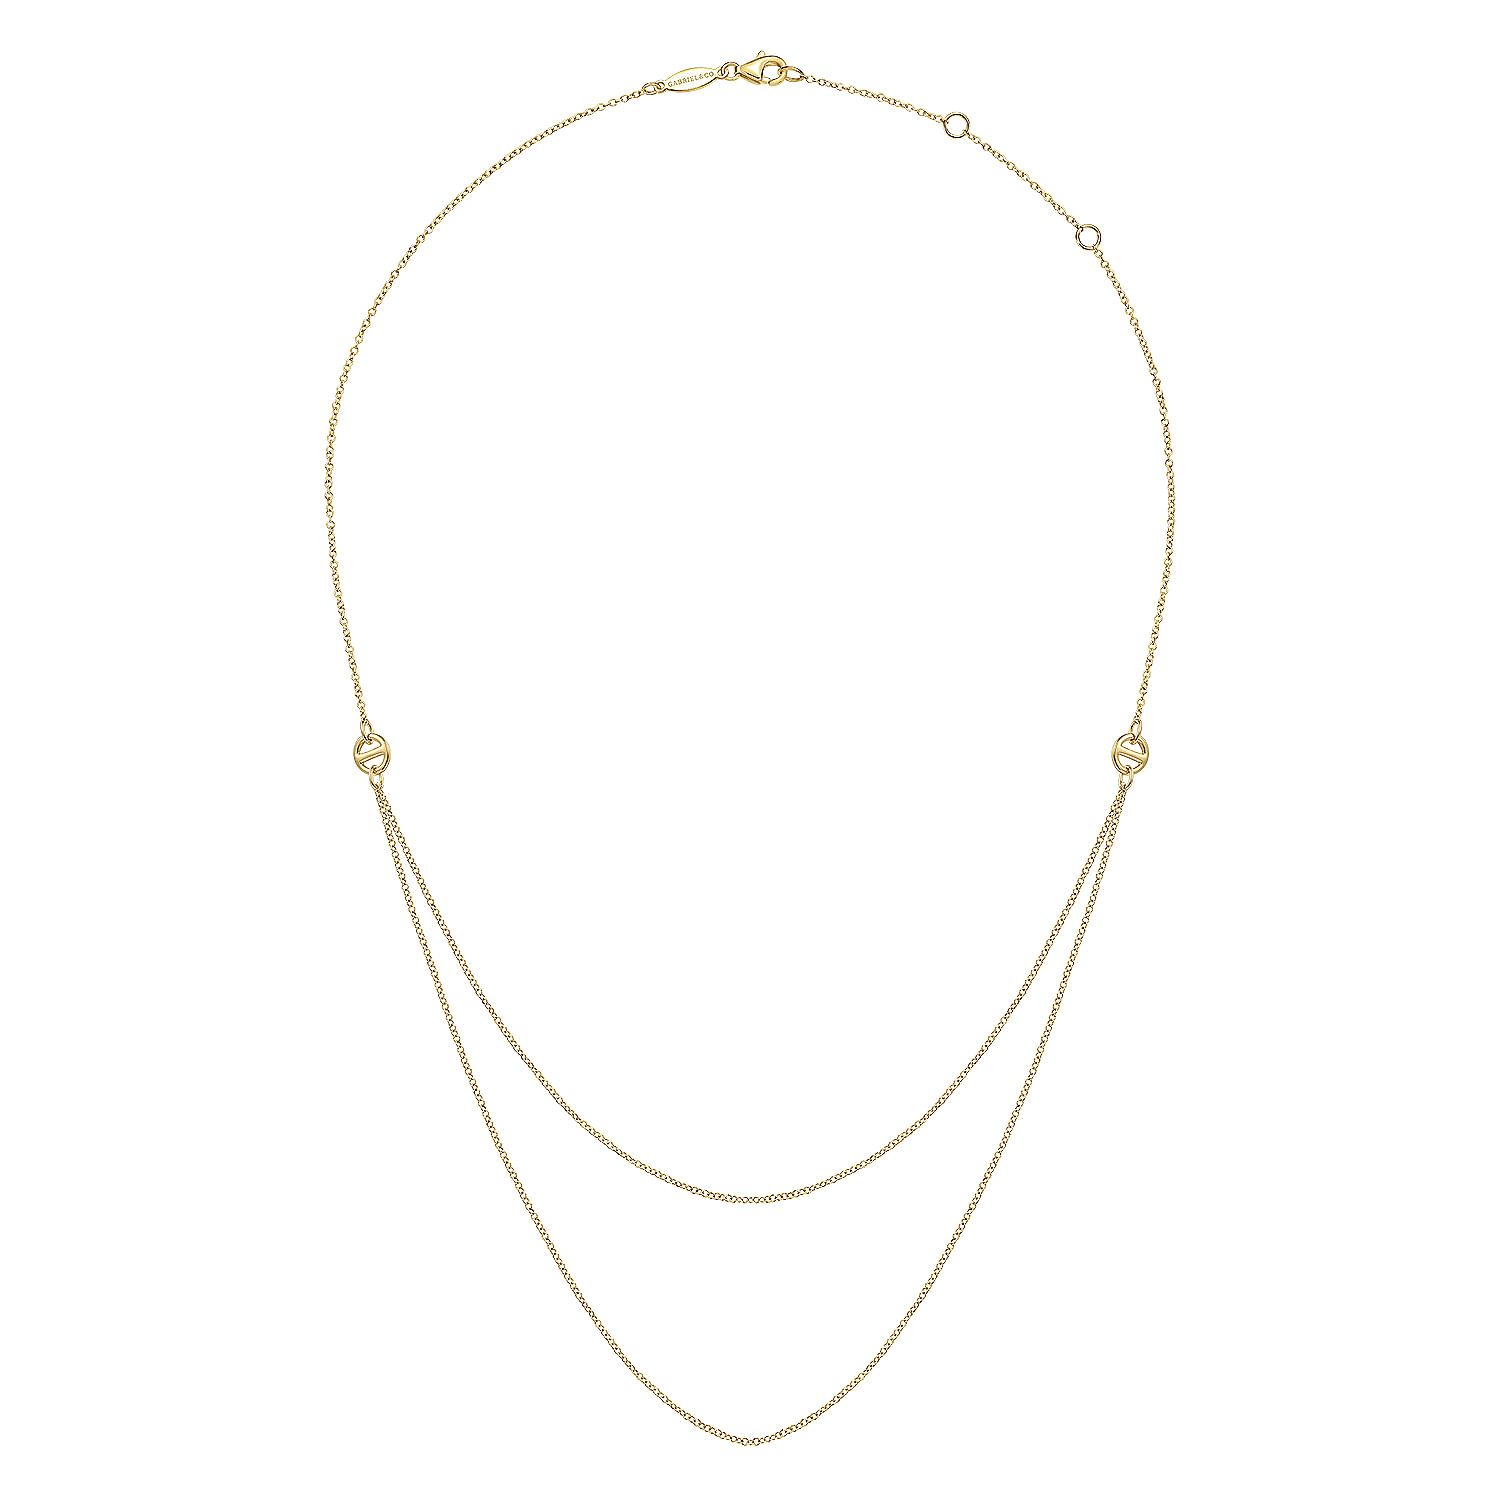 20 inch 14K Yellow Gold Chain Swag Necklace